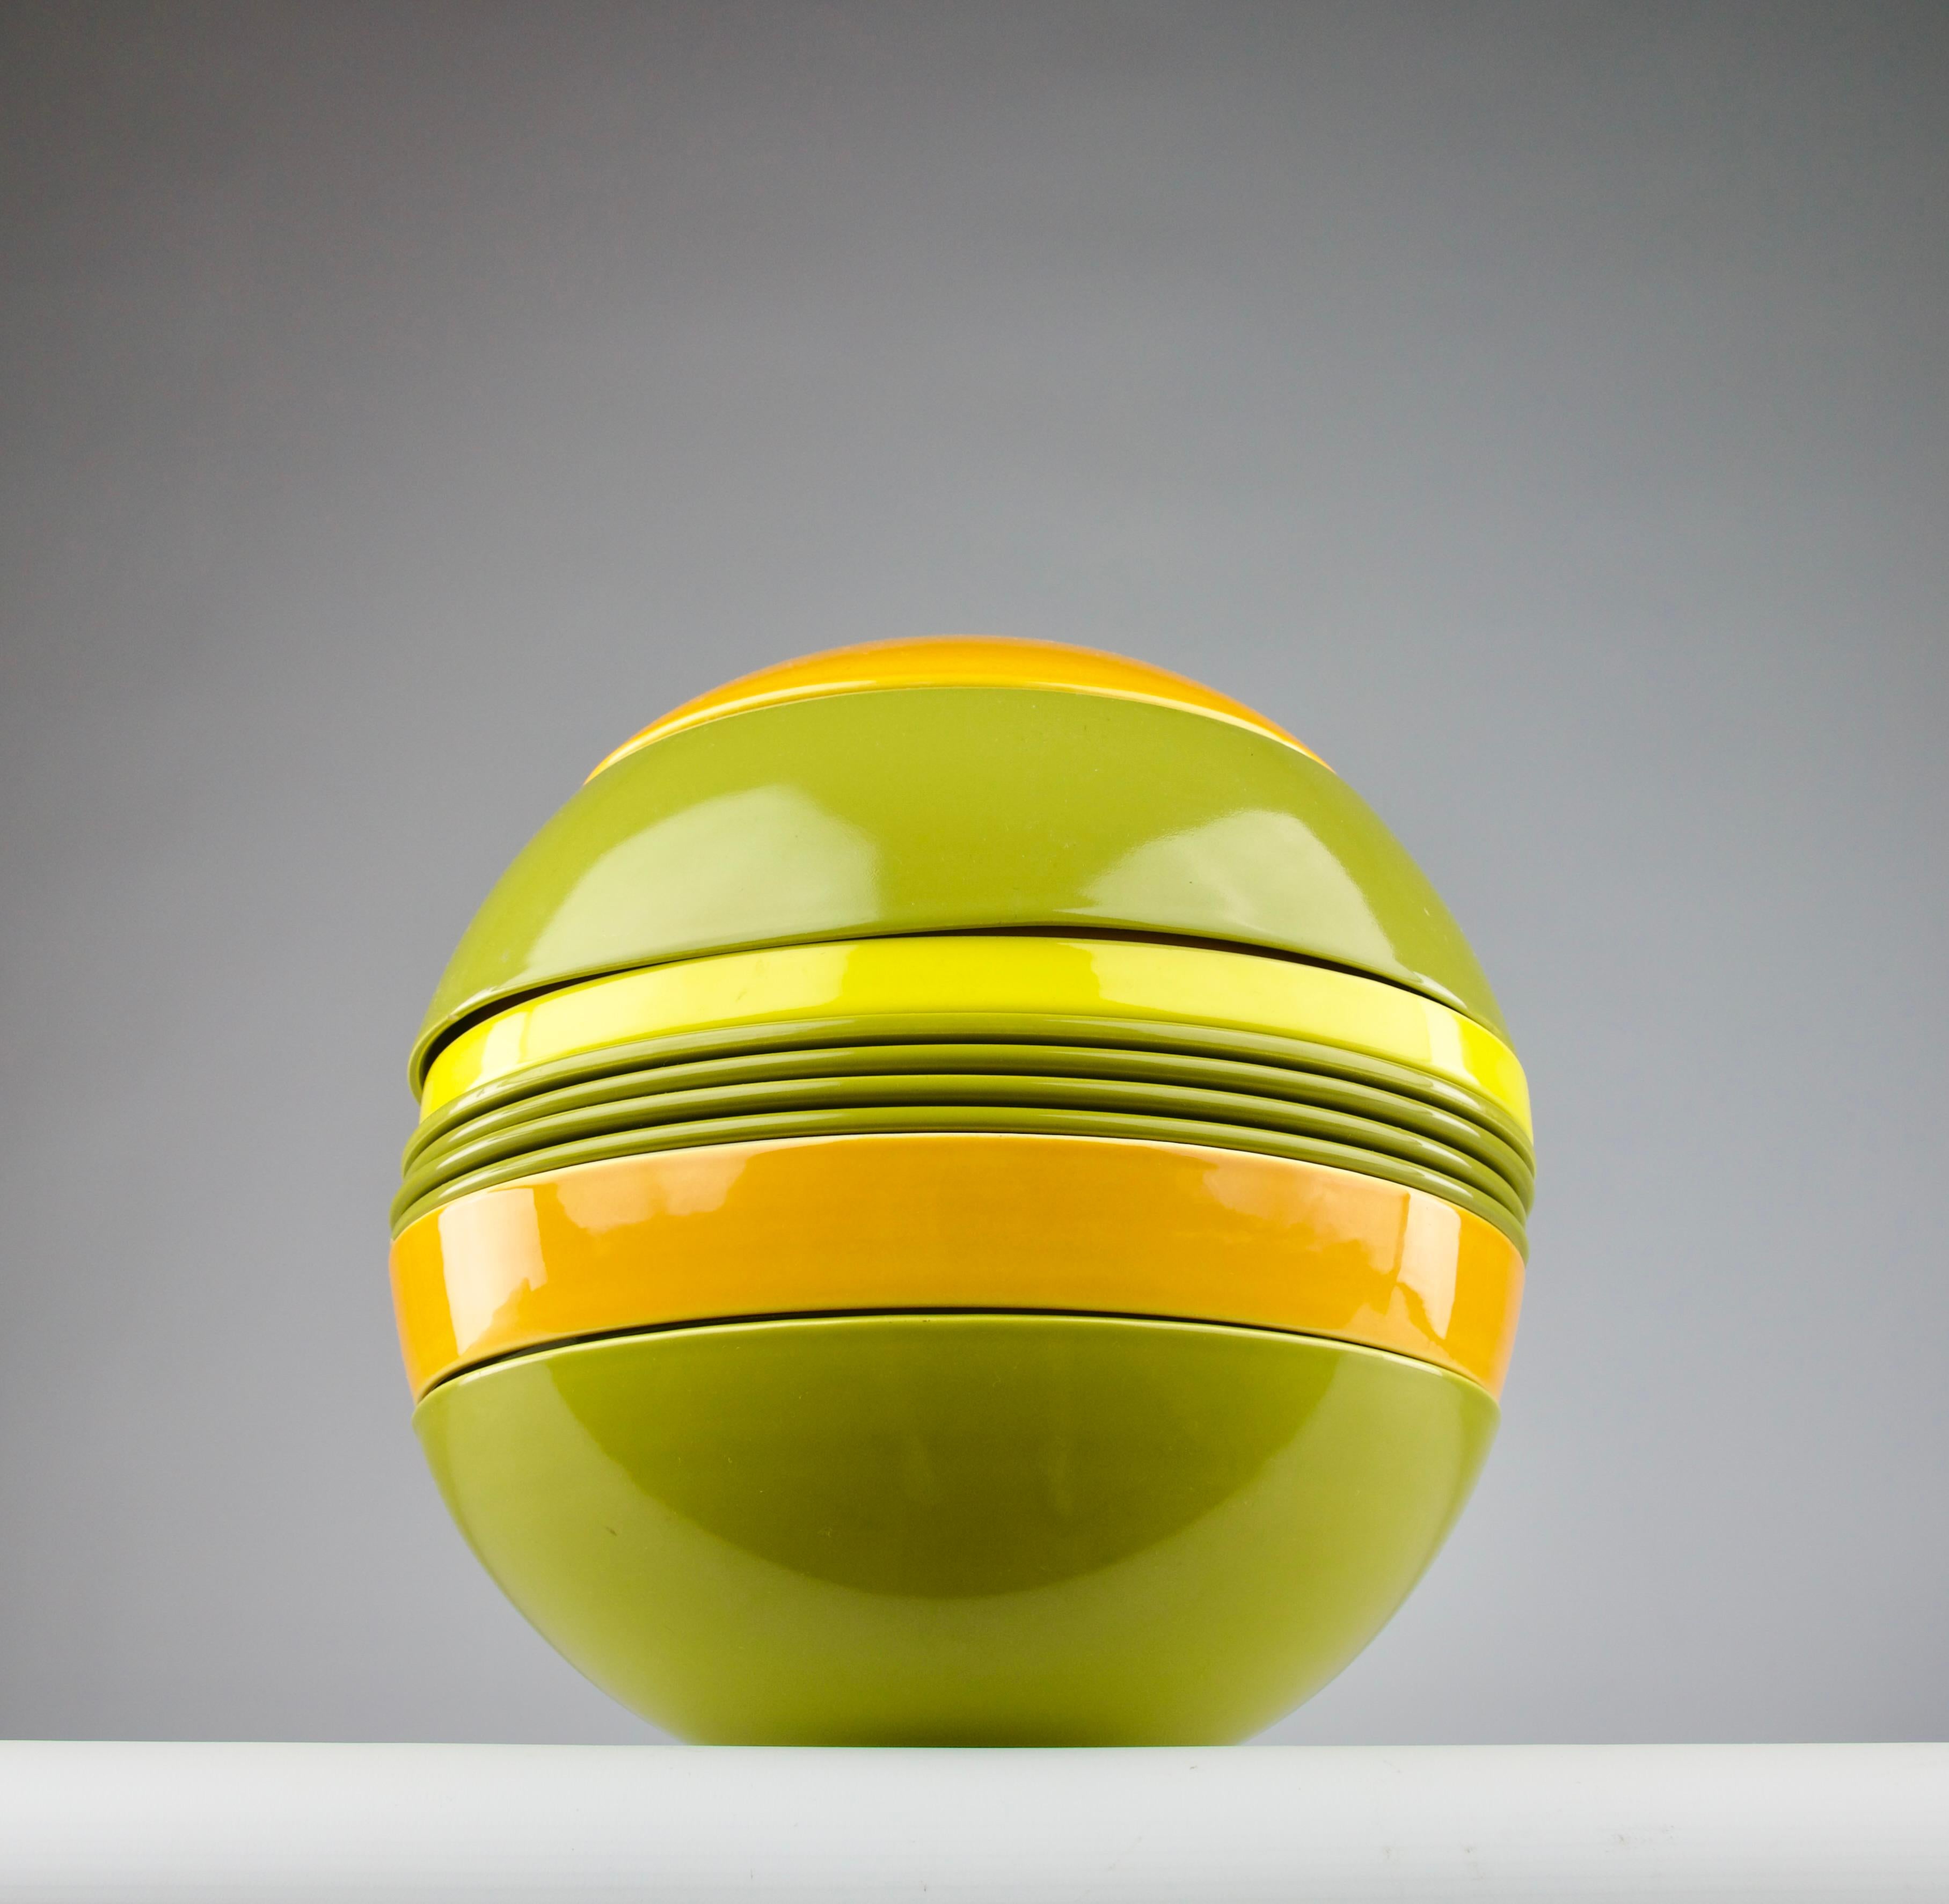 Superb mid century modern design ball service by Helen Von Boch for the 1971 Avant Garde collection of Villeroy & Boch in Germany.

Good condition. One small chip underneath six out of nineteen pieces.

Diameter of the piece : 28cm

Secure shipping.